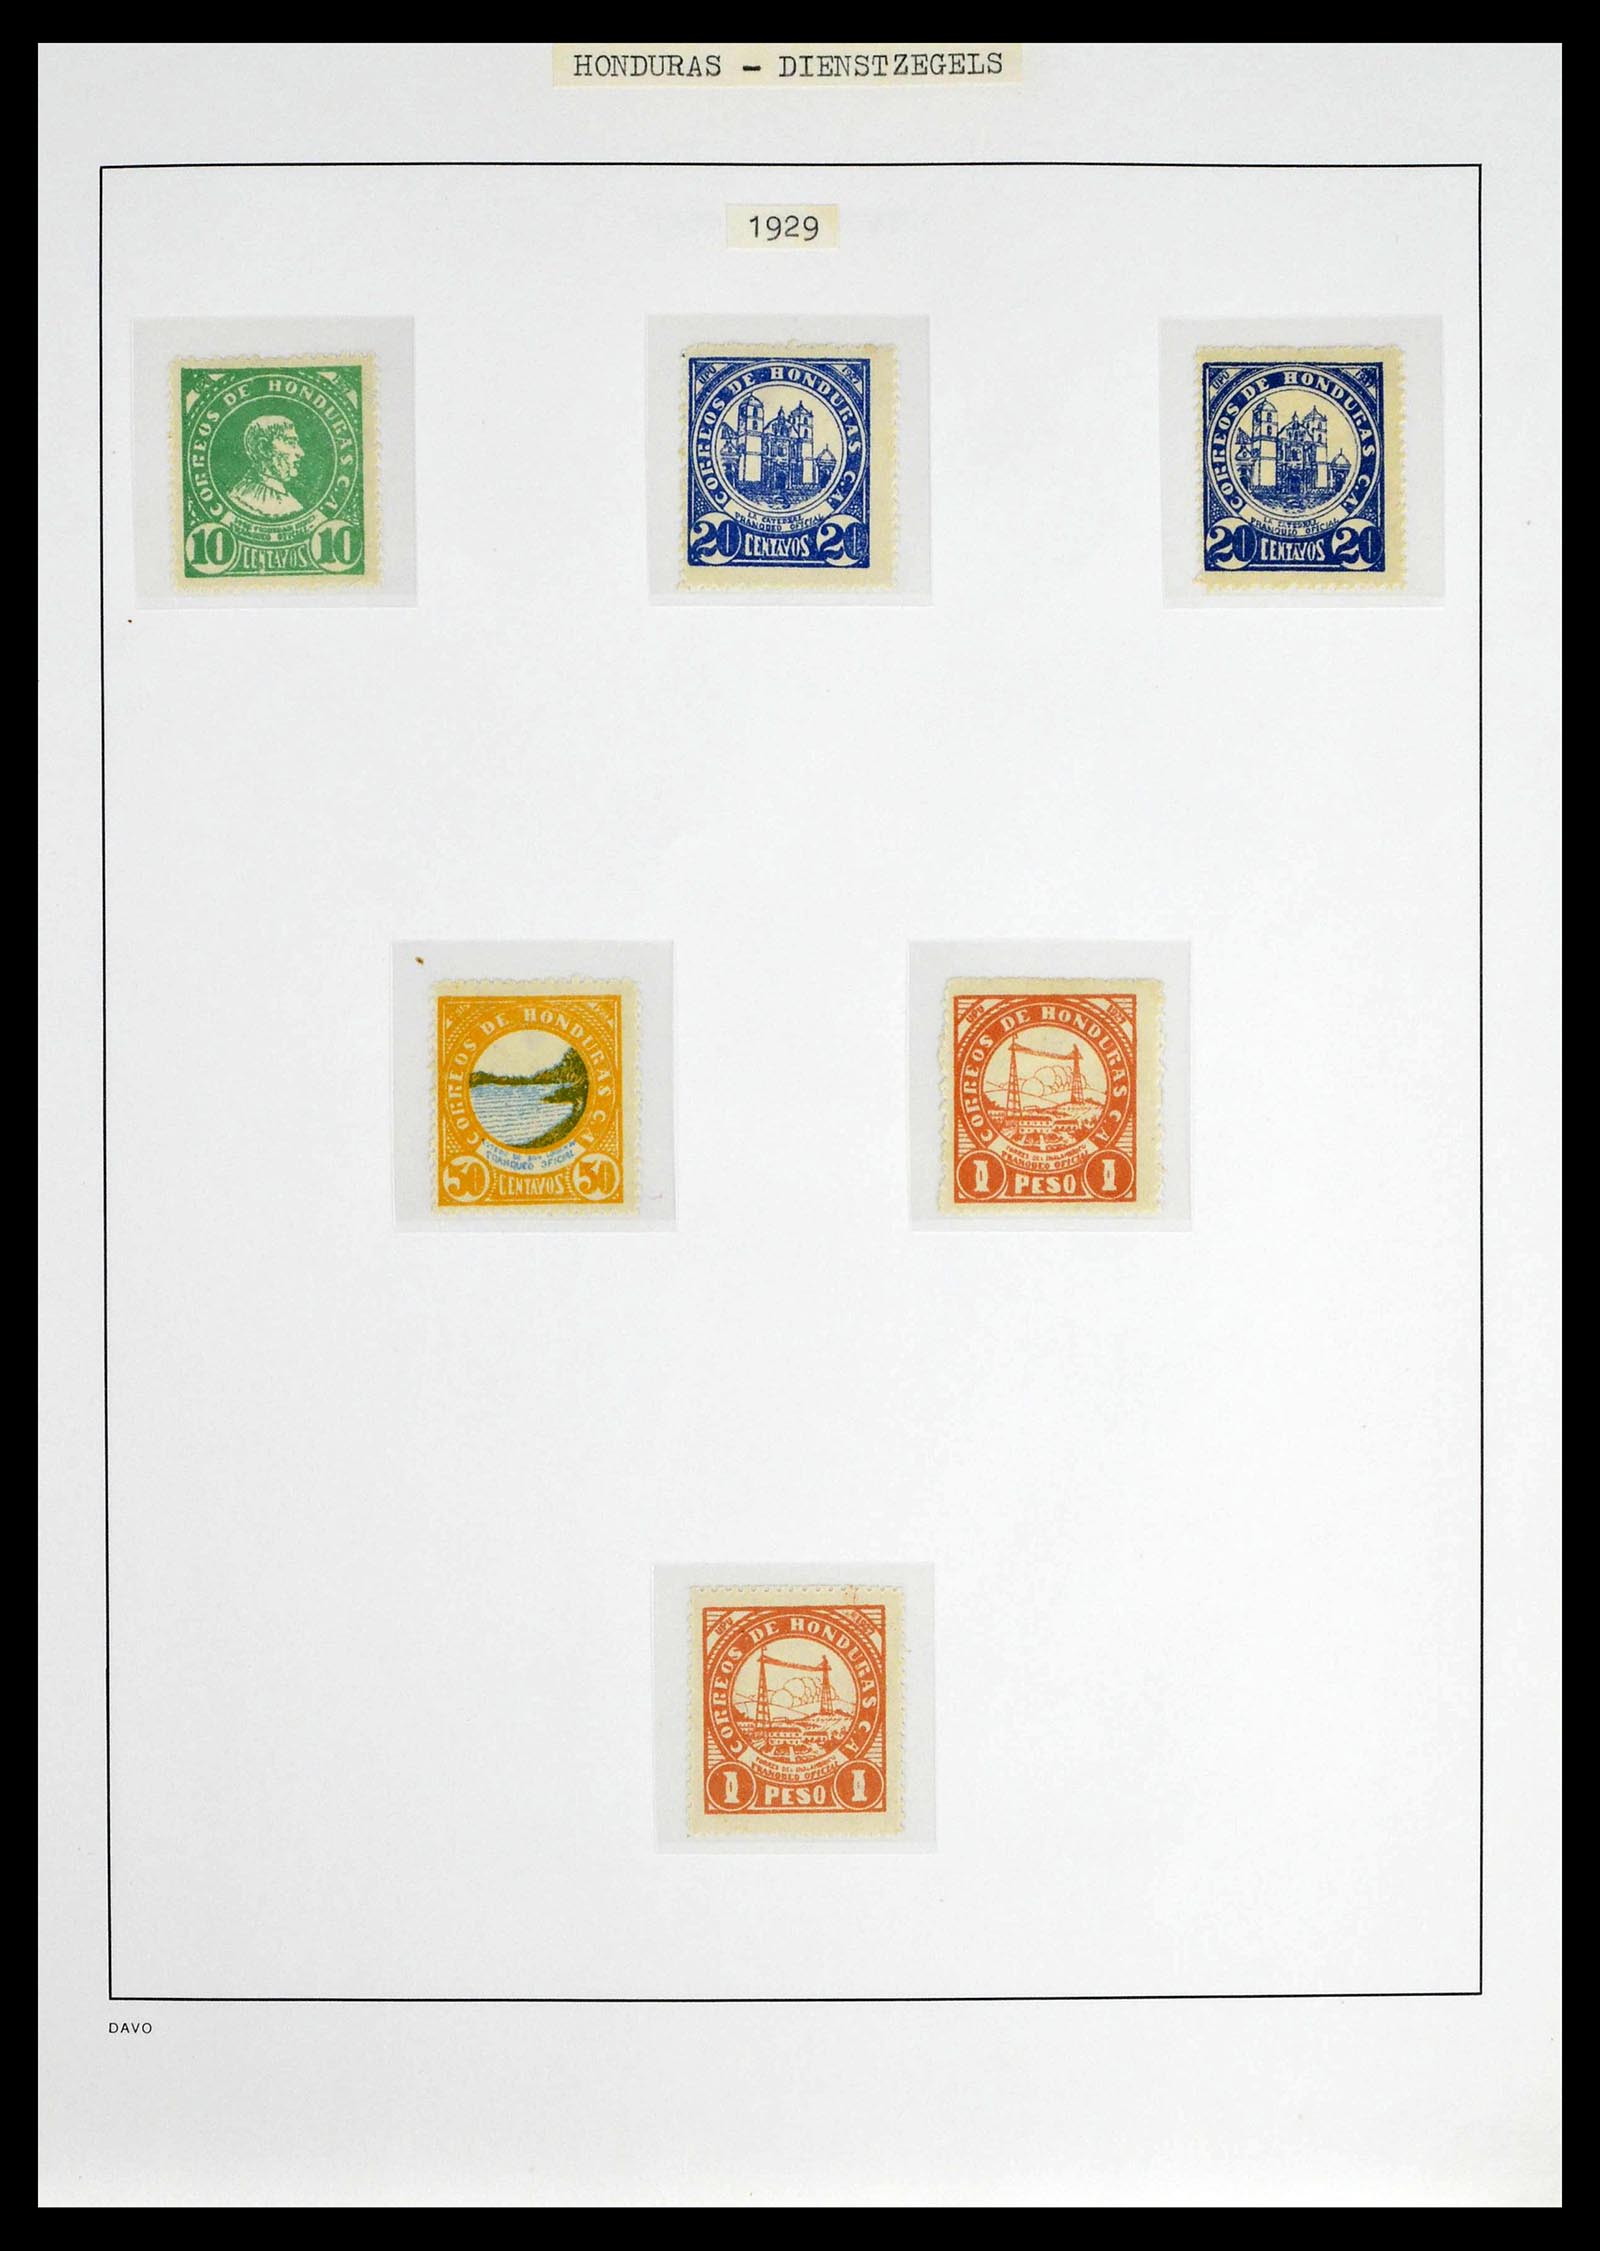 39404 0020 - Stamp collection 39404 Honduras service stamps 1890-1974.